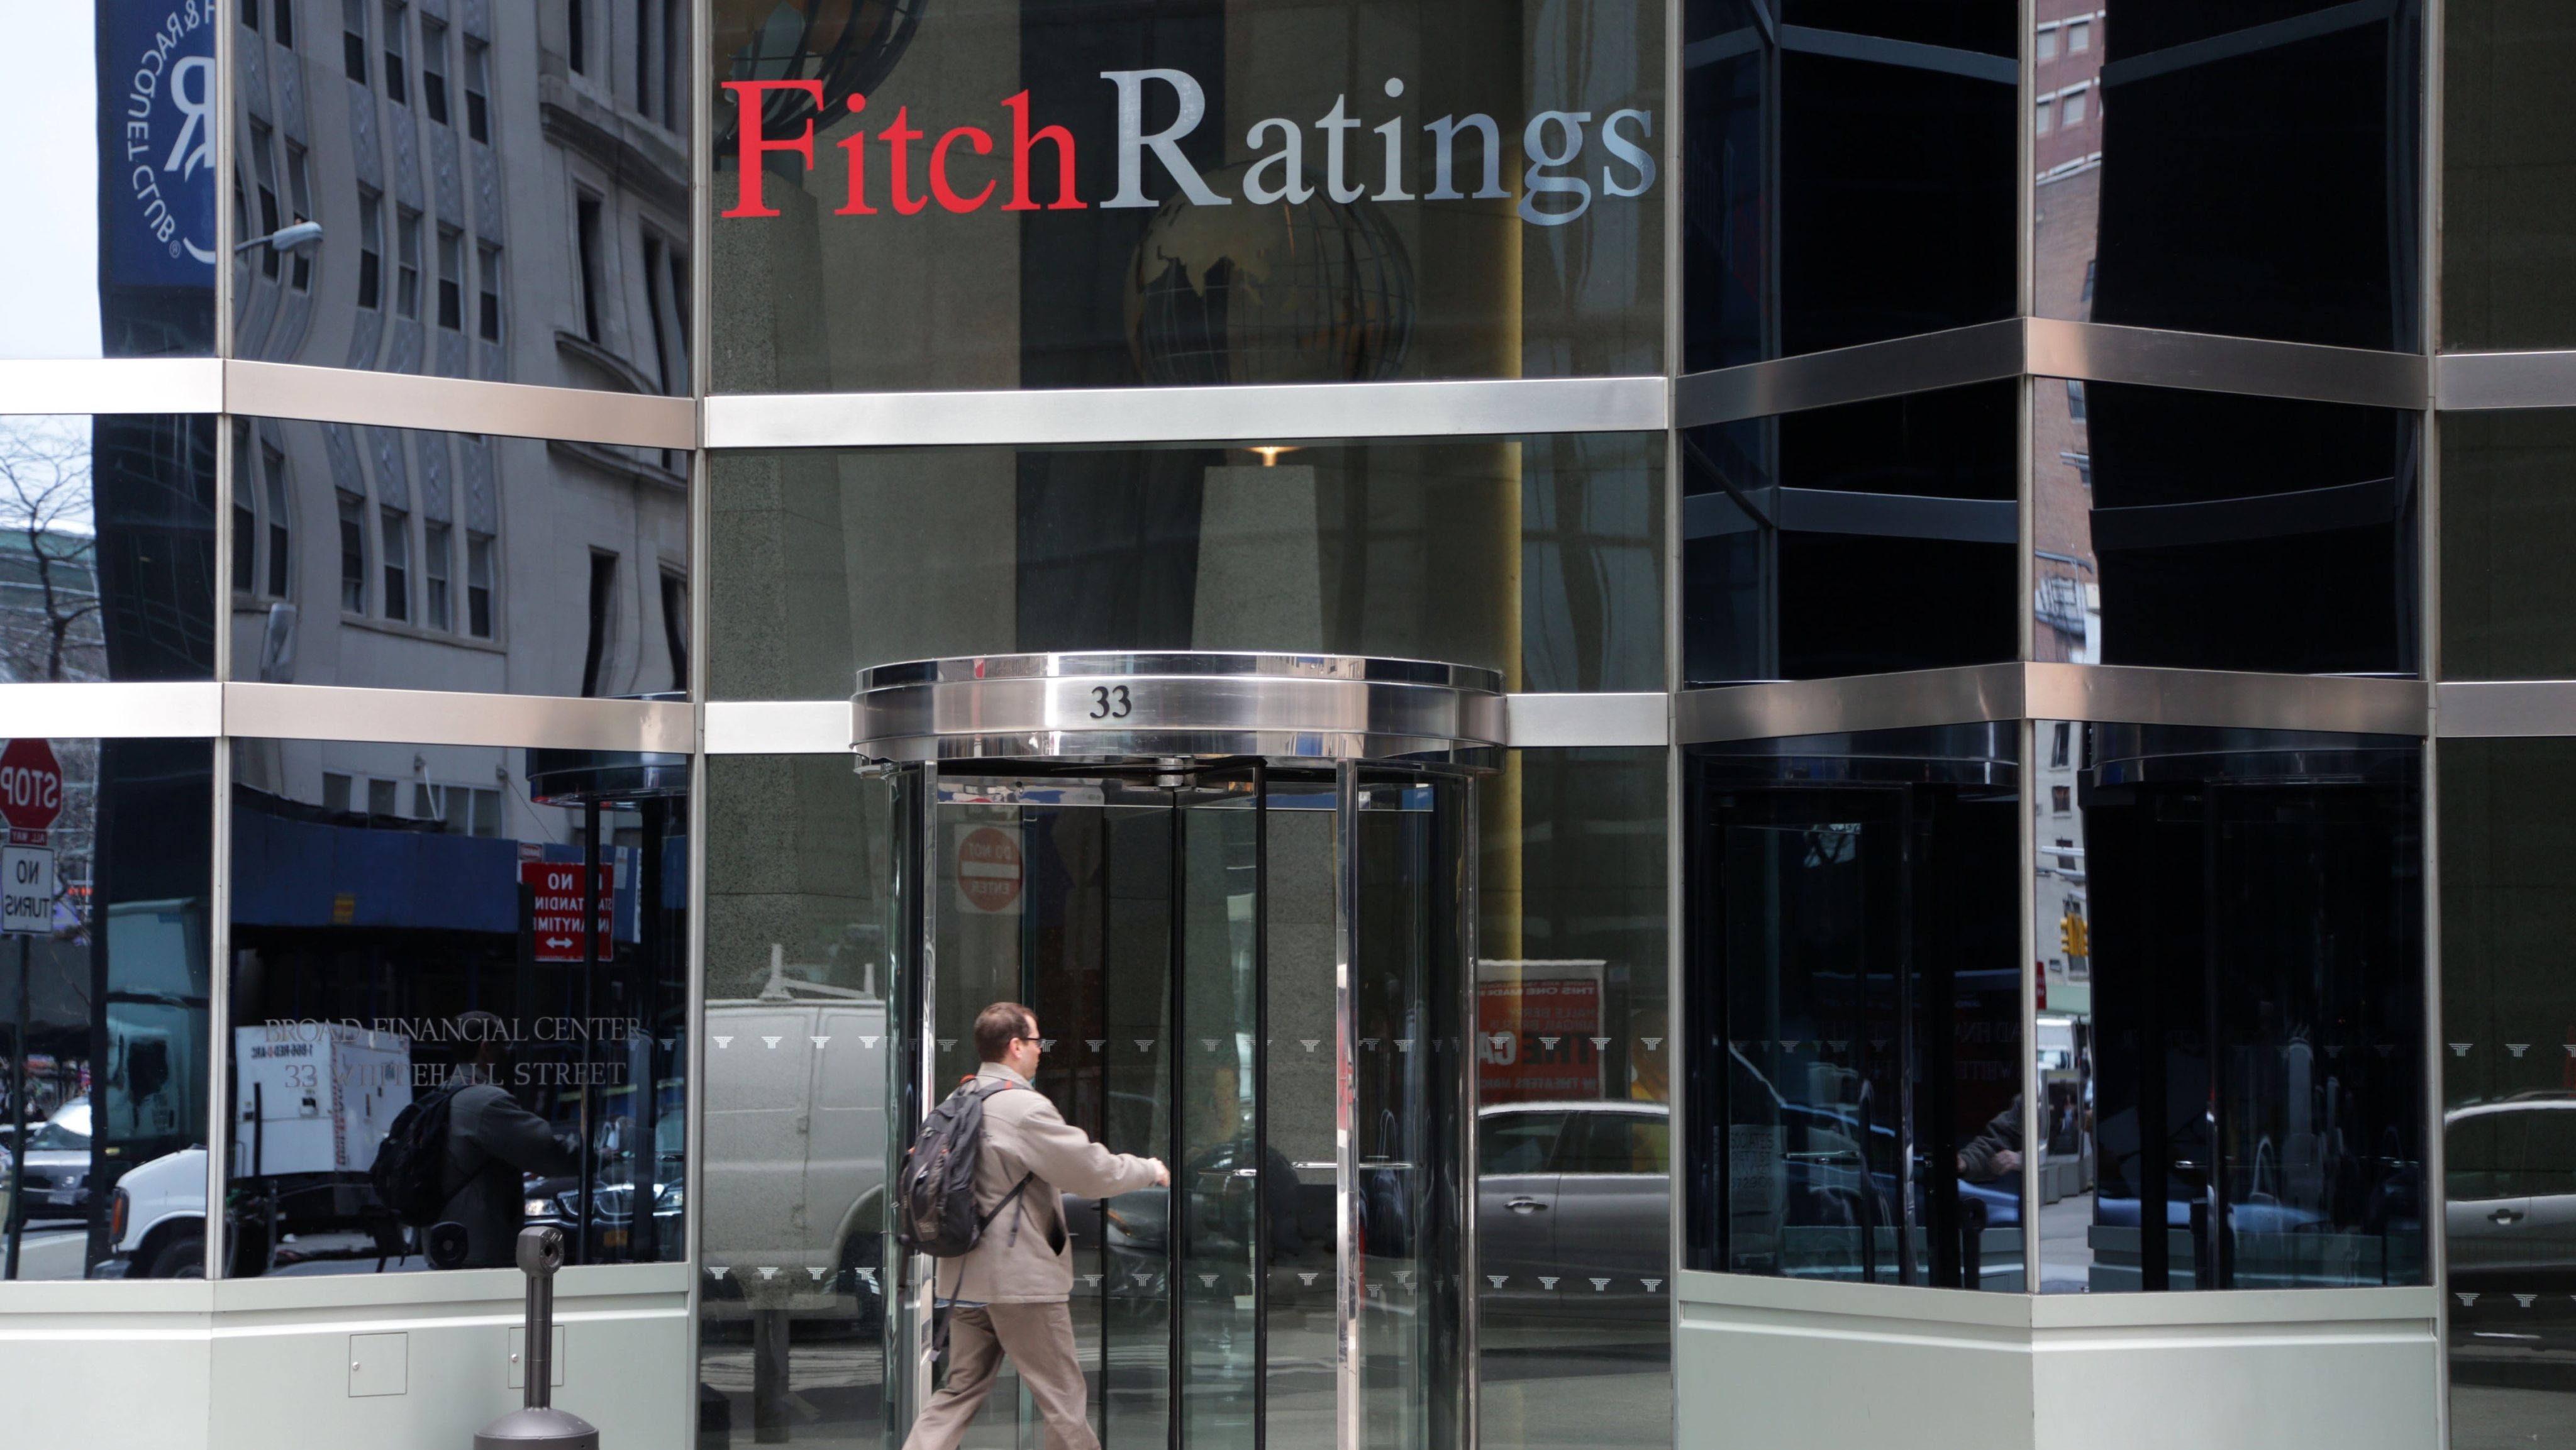 Fitch Ratings Zentrale in New York